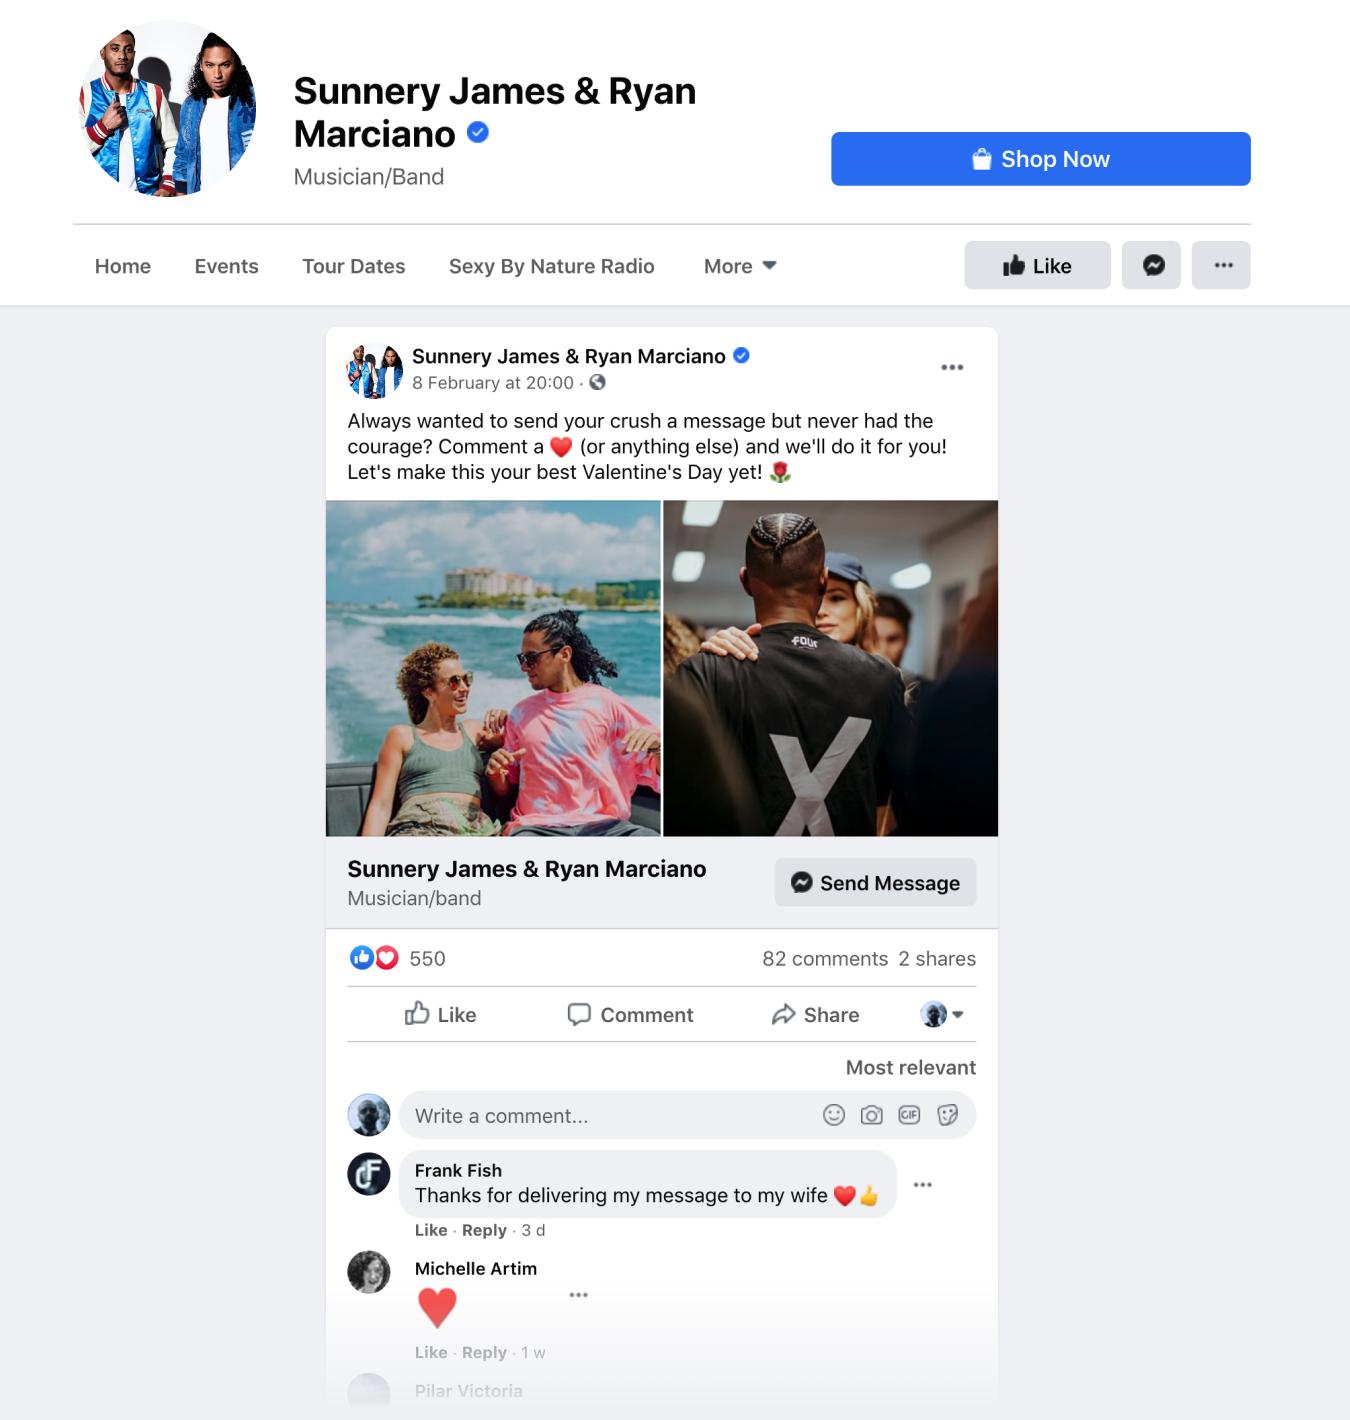 Sunnery-James-Ryan-Marciano-Comment-to-Messenger-Valentines-Day-Facebook-post